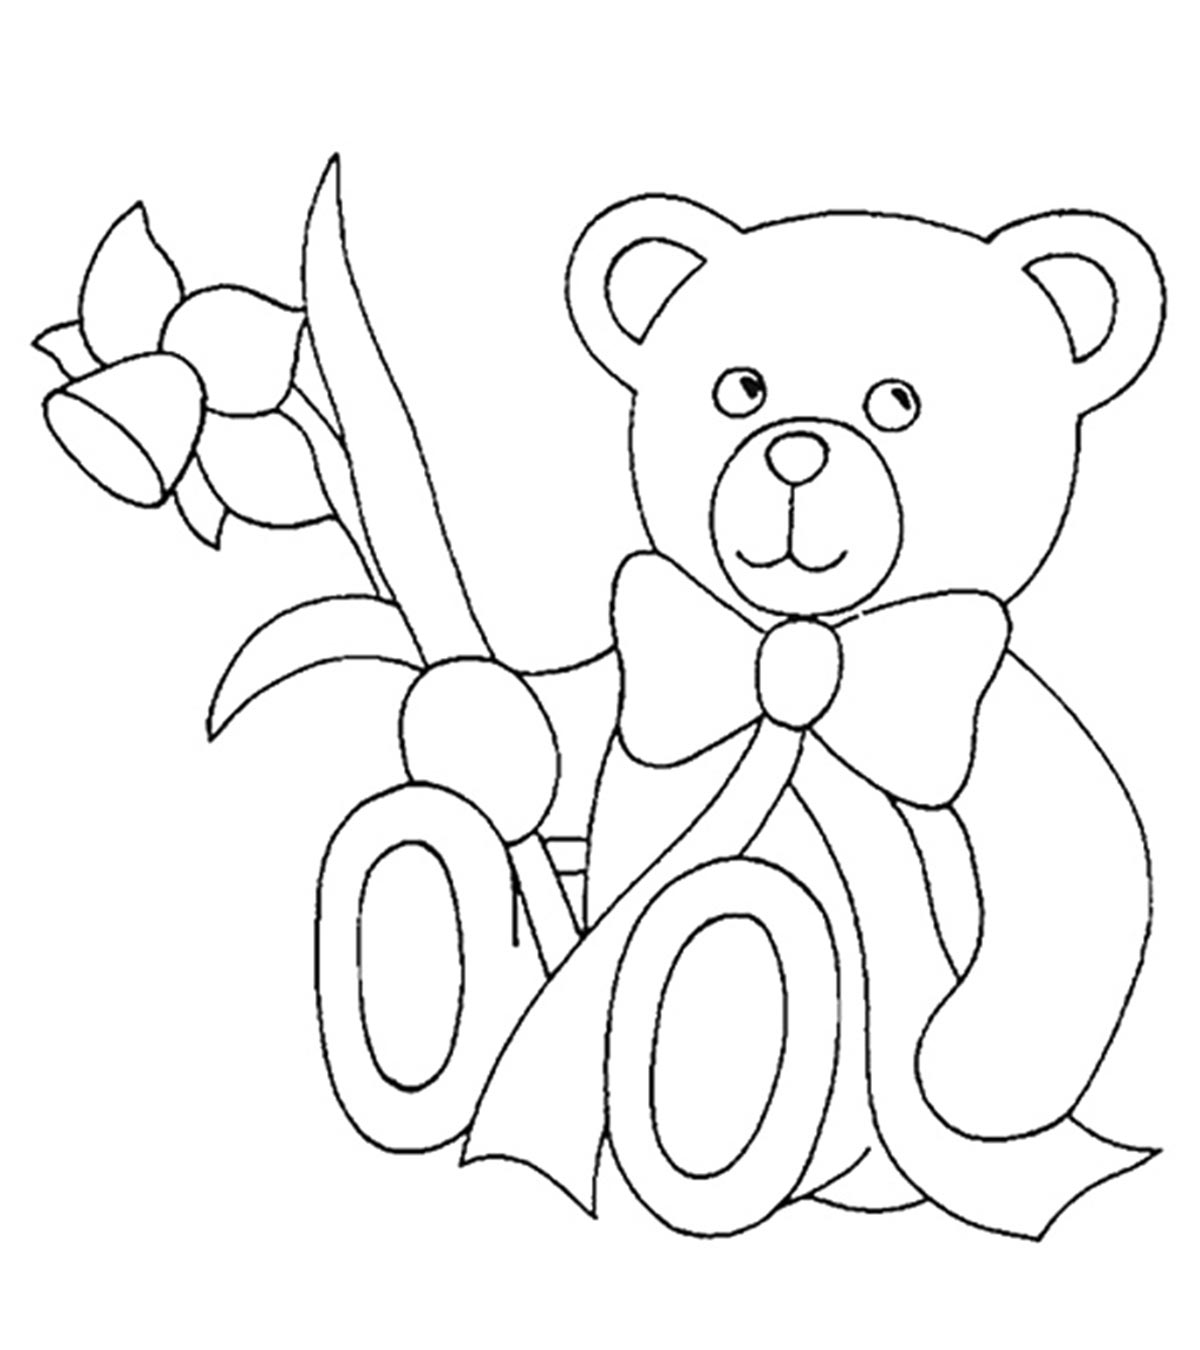 Top 18 Teddy Bear Coloring Pages Your Toddler Will Love To Color